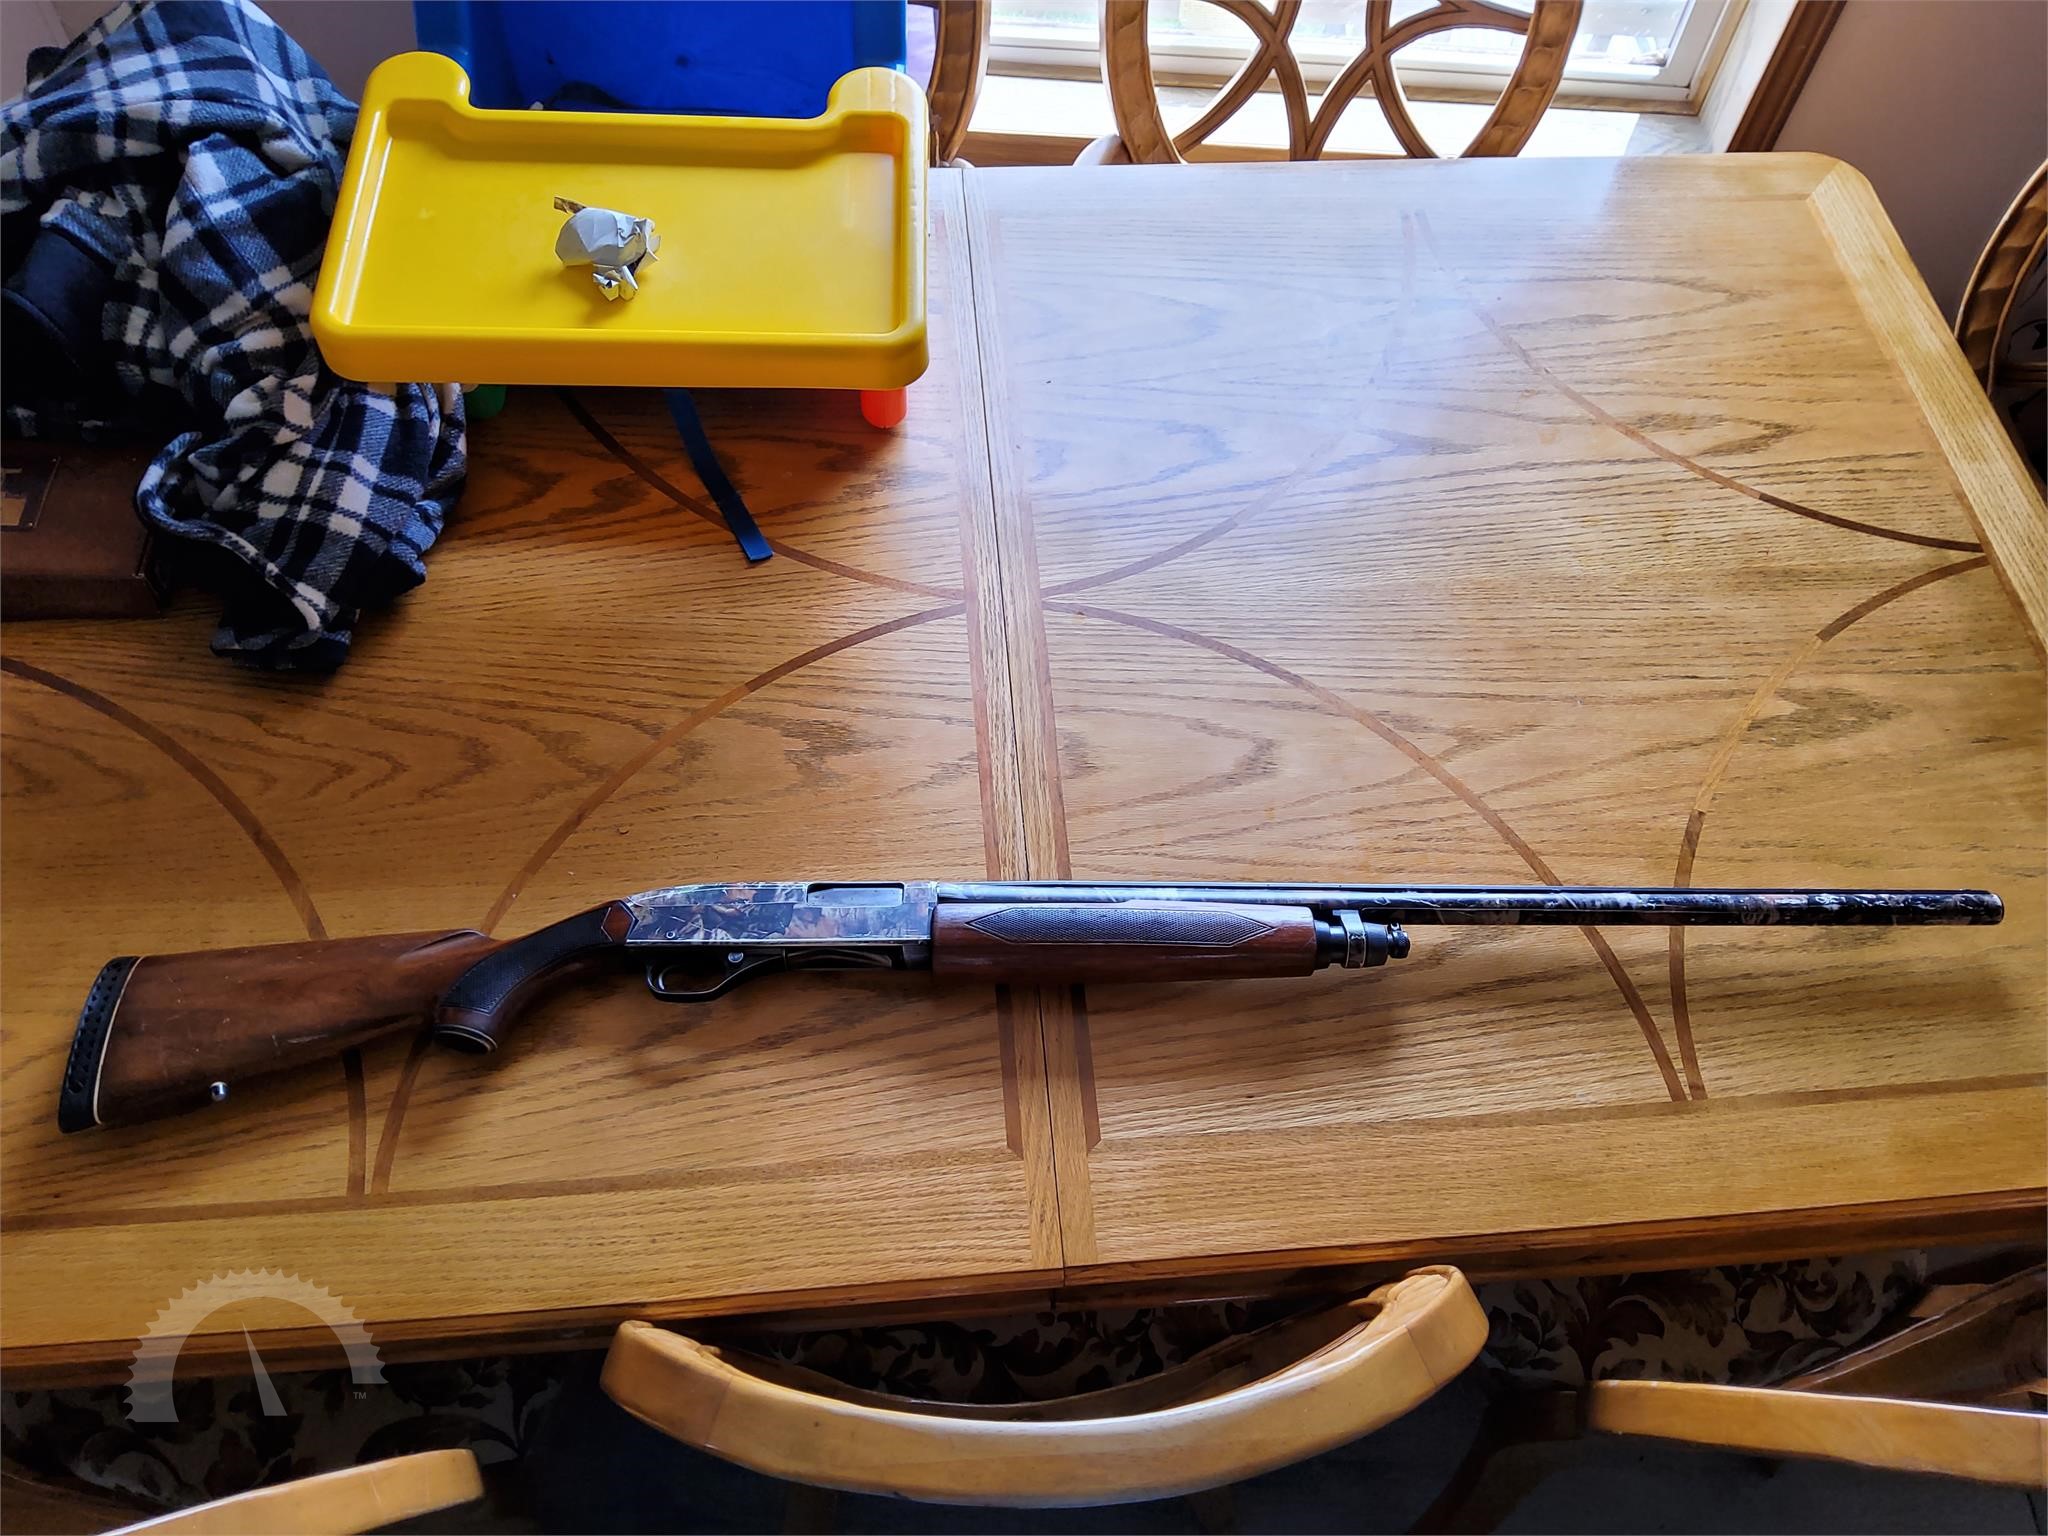 Shotguns Firearms / Weapons Auction Results